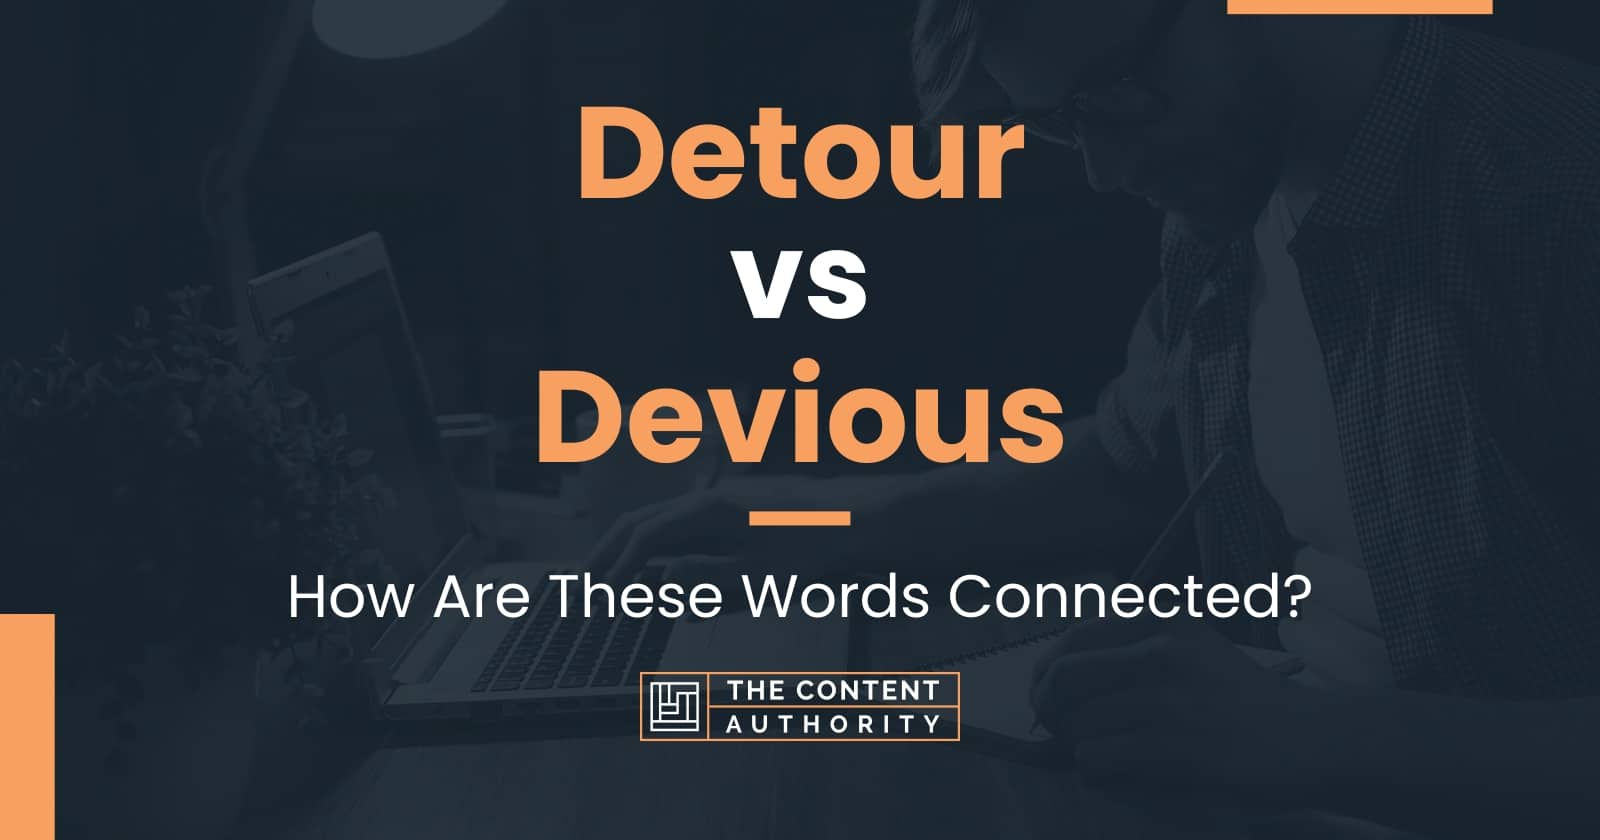 Detour Vs Devious How Are These Words Connected